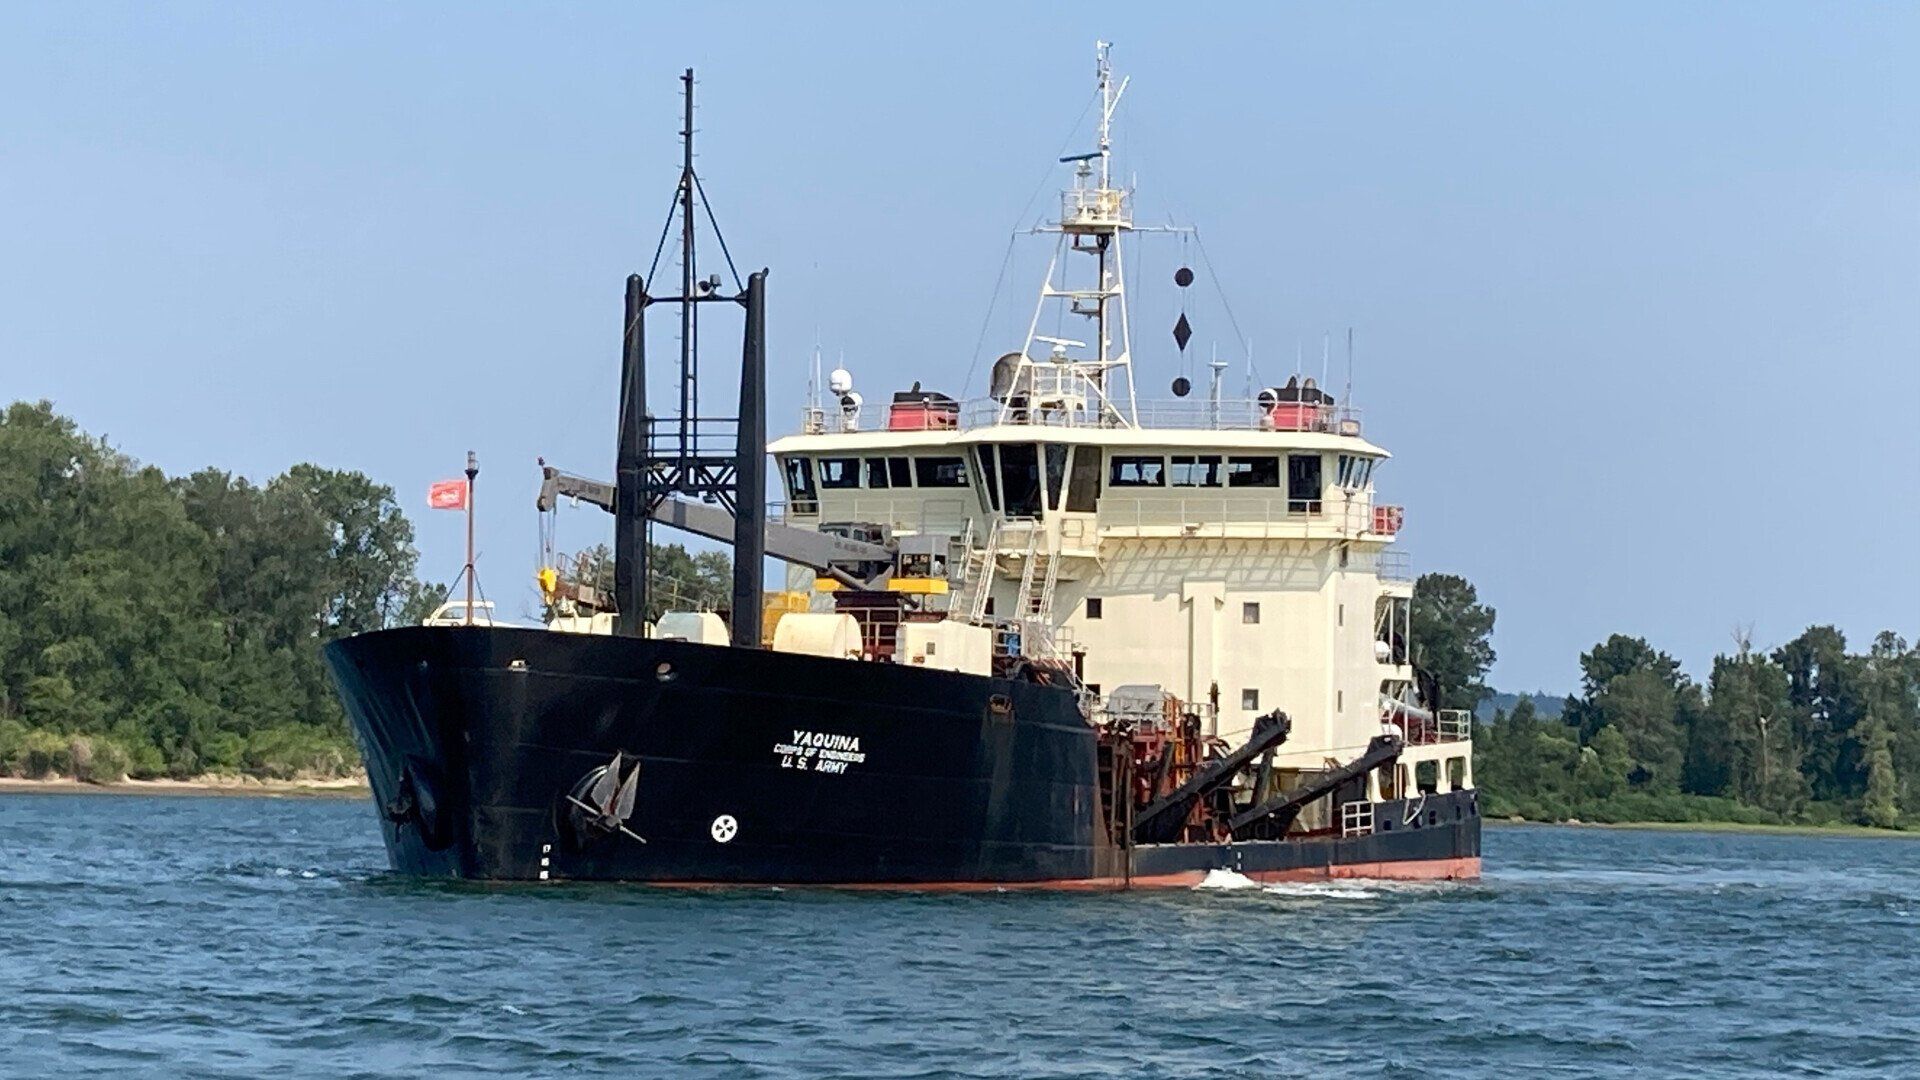 The hopper dredge Yaquina, one of two hopper dredges owned by Portland District, USACE